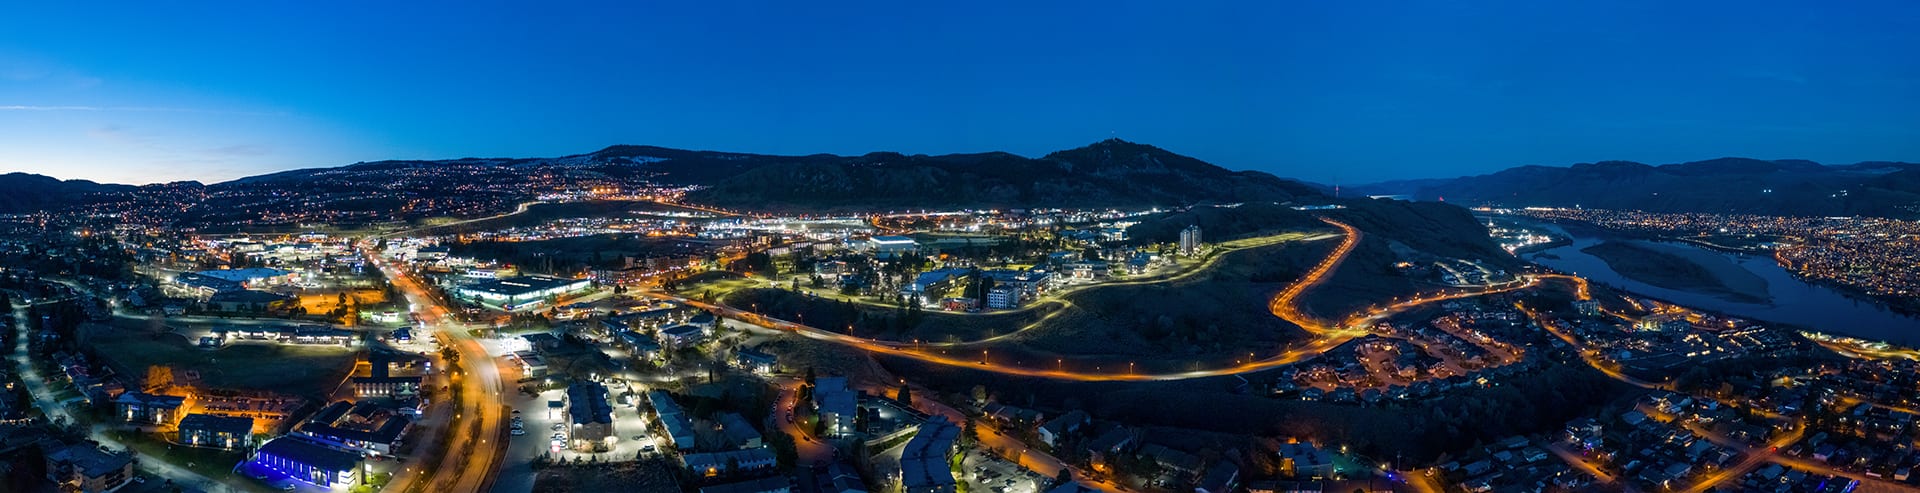 Kamloops City Aerial brightly lit roads with blue sky and cars